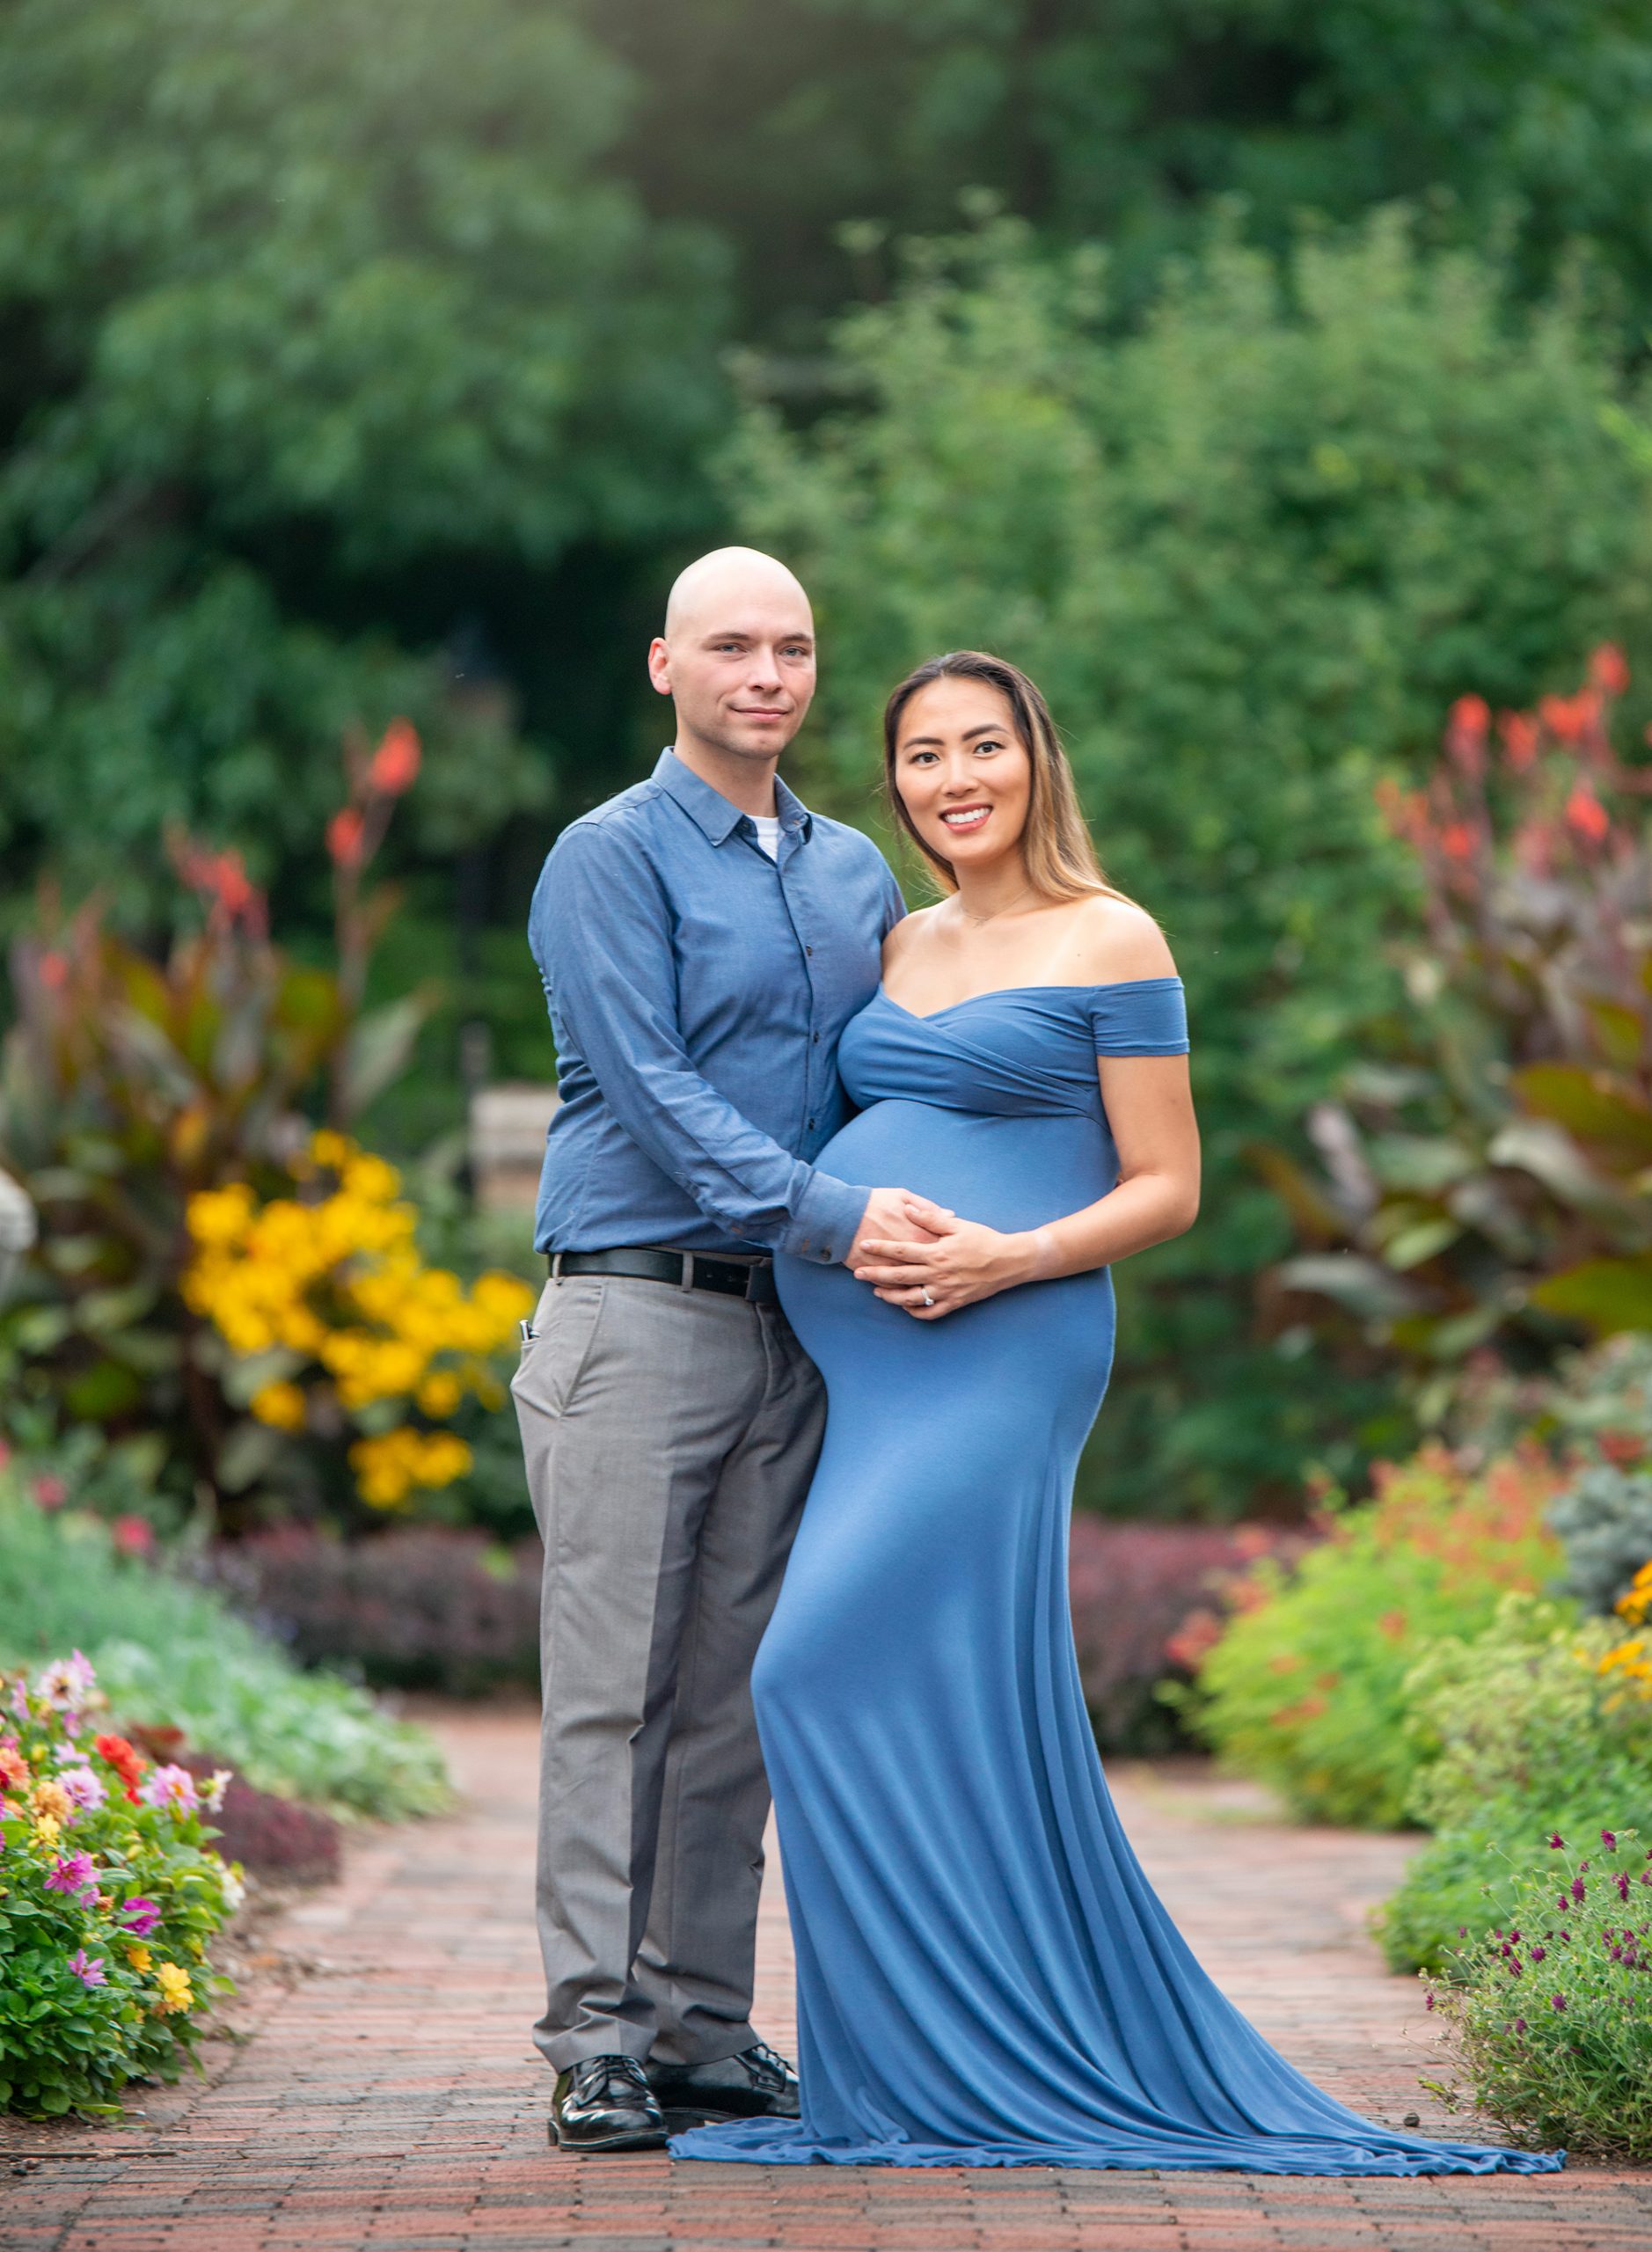 pregnant woman posing with her partner in a flower garden